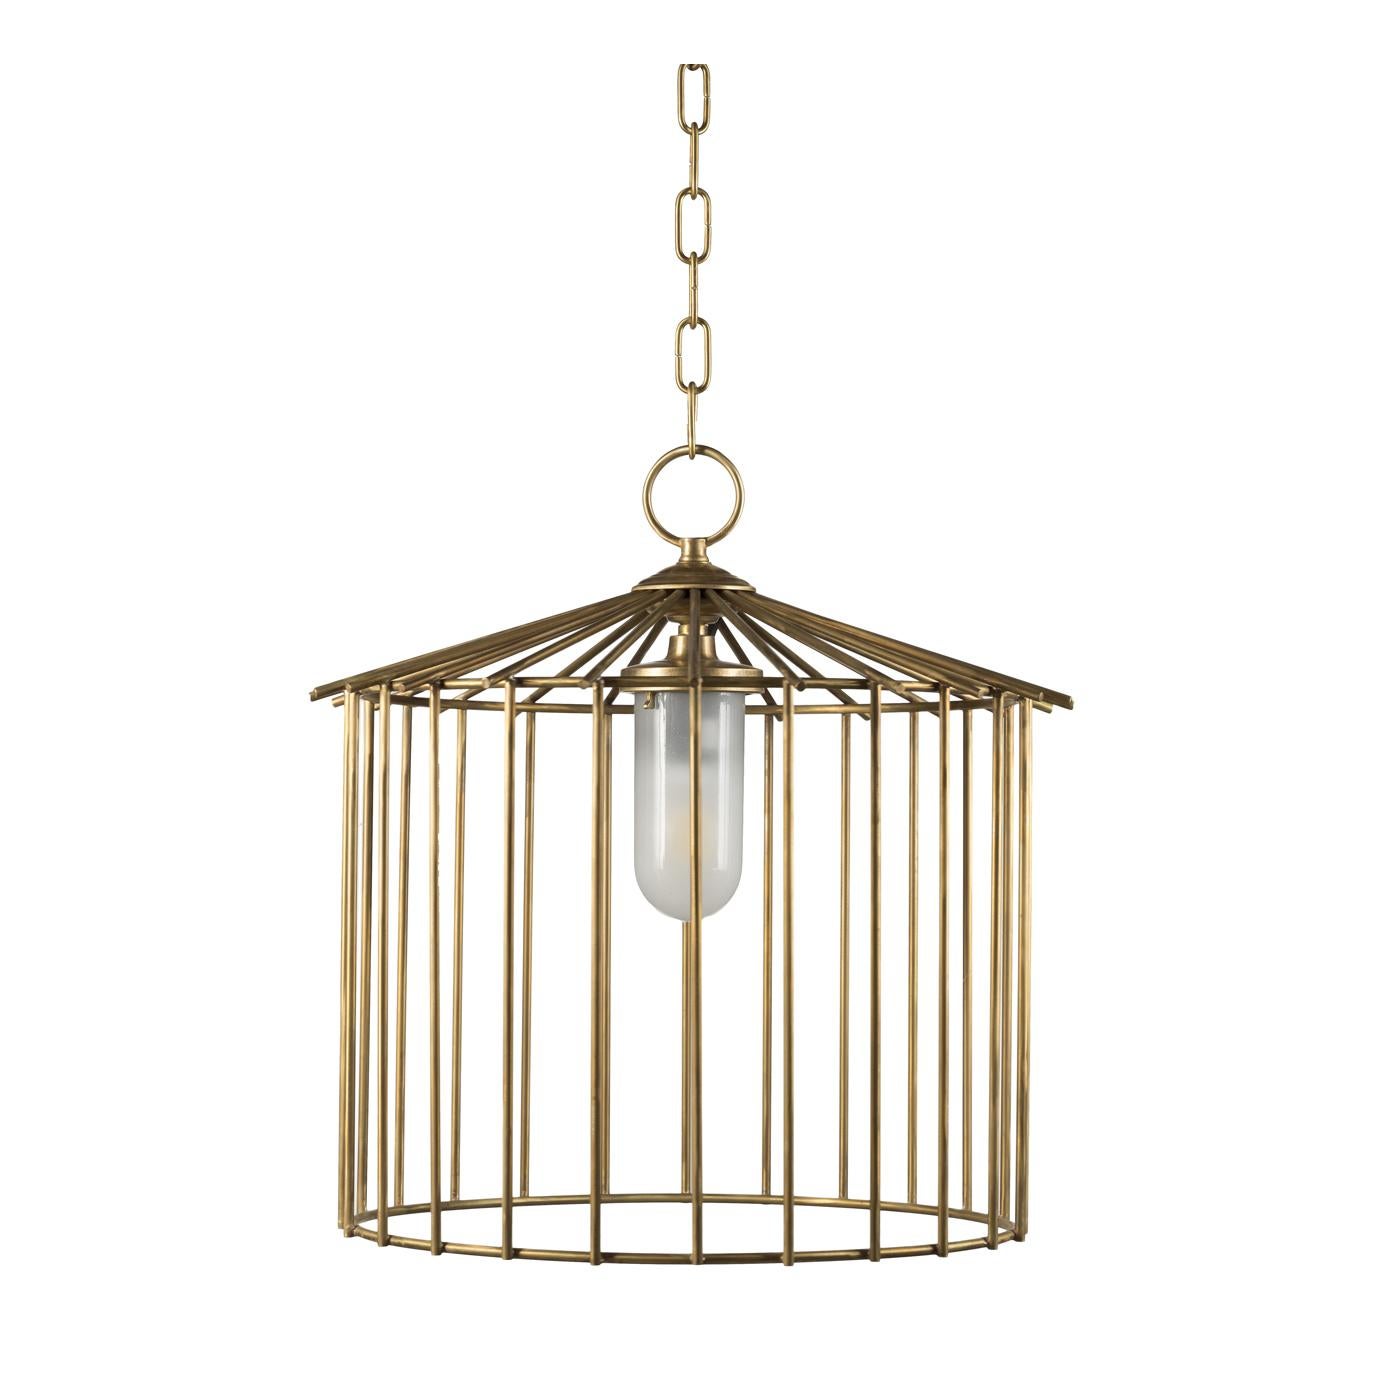 Part of the Cage series whose objects feature a cage-like structural element, this ceiling lamp has a chain supporting a cone structure from whose perimeter vertically stem a series of rods that form a circle, enclosing a single light. The whole